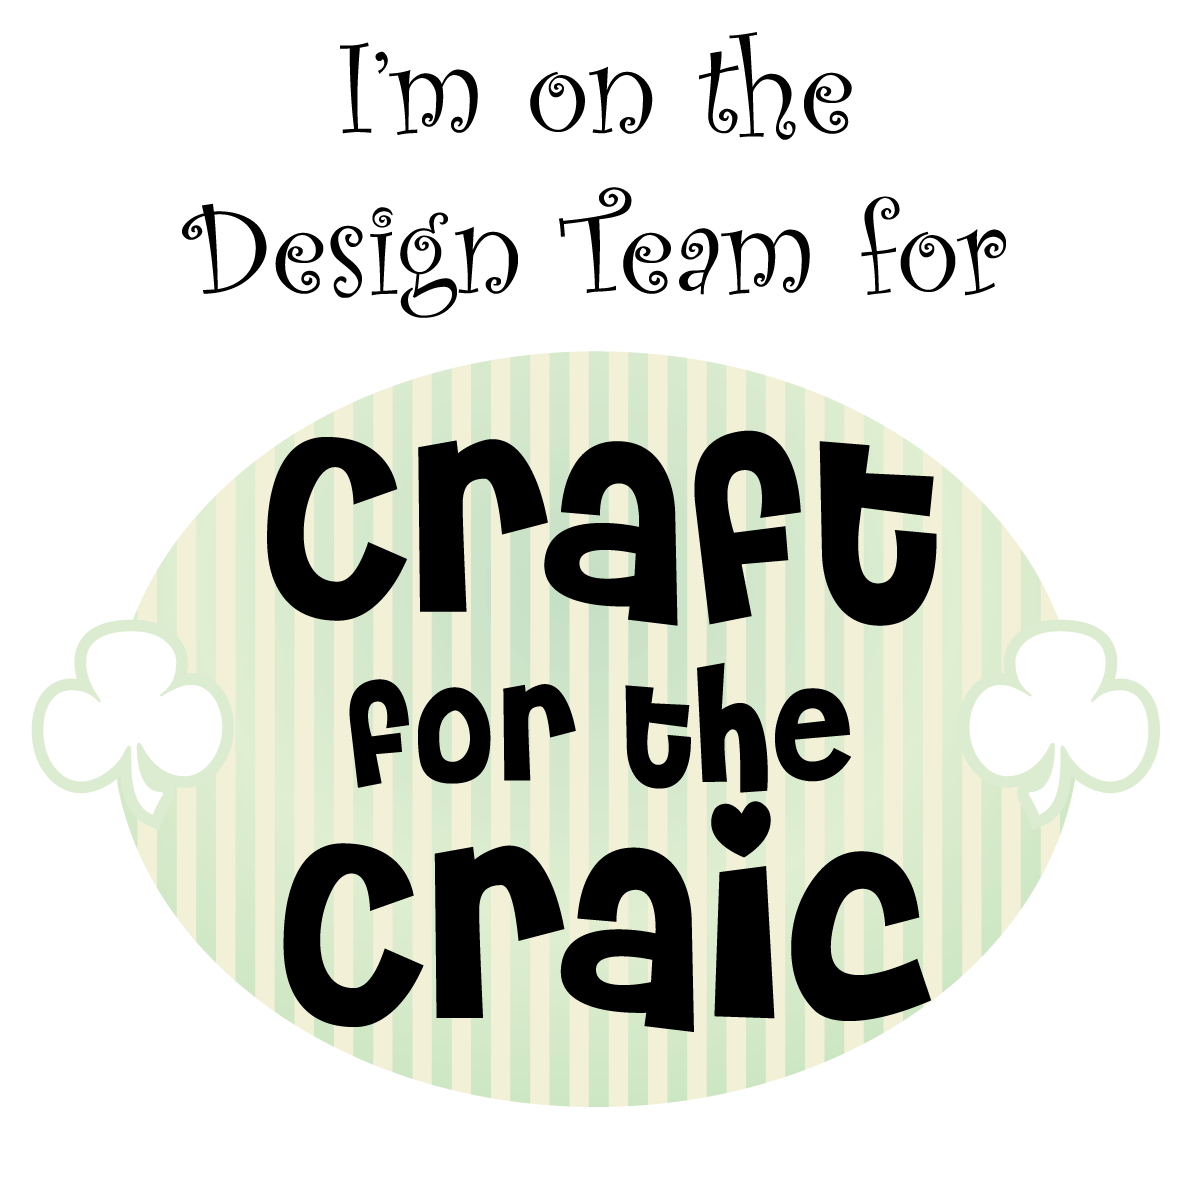 Craft for the Craic